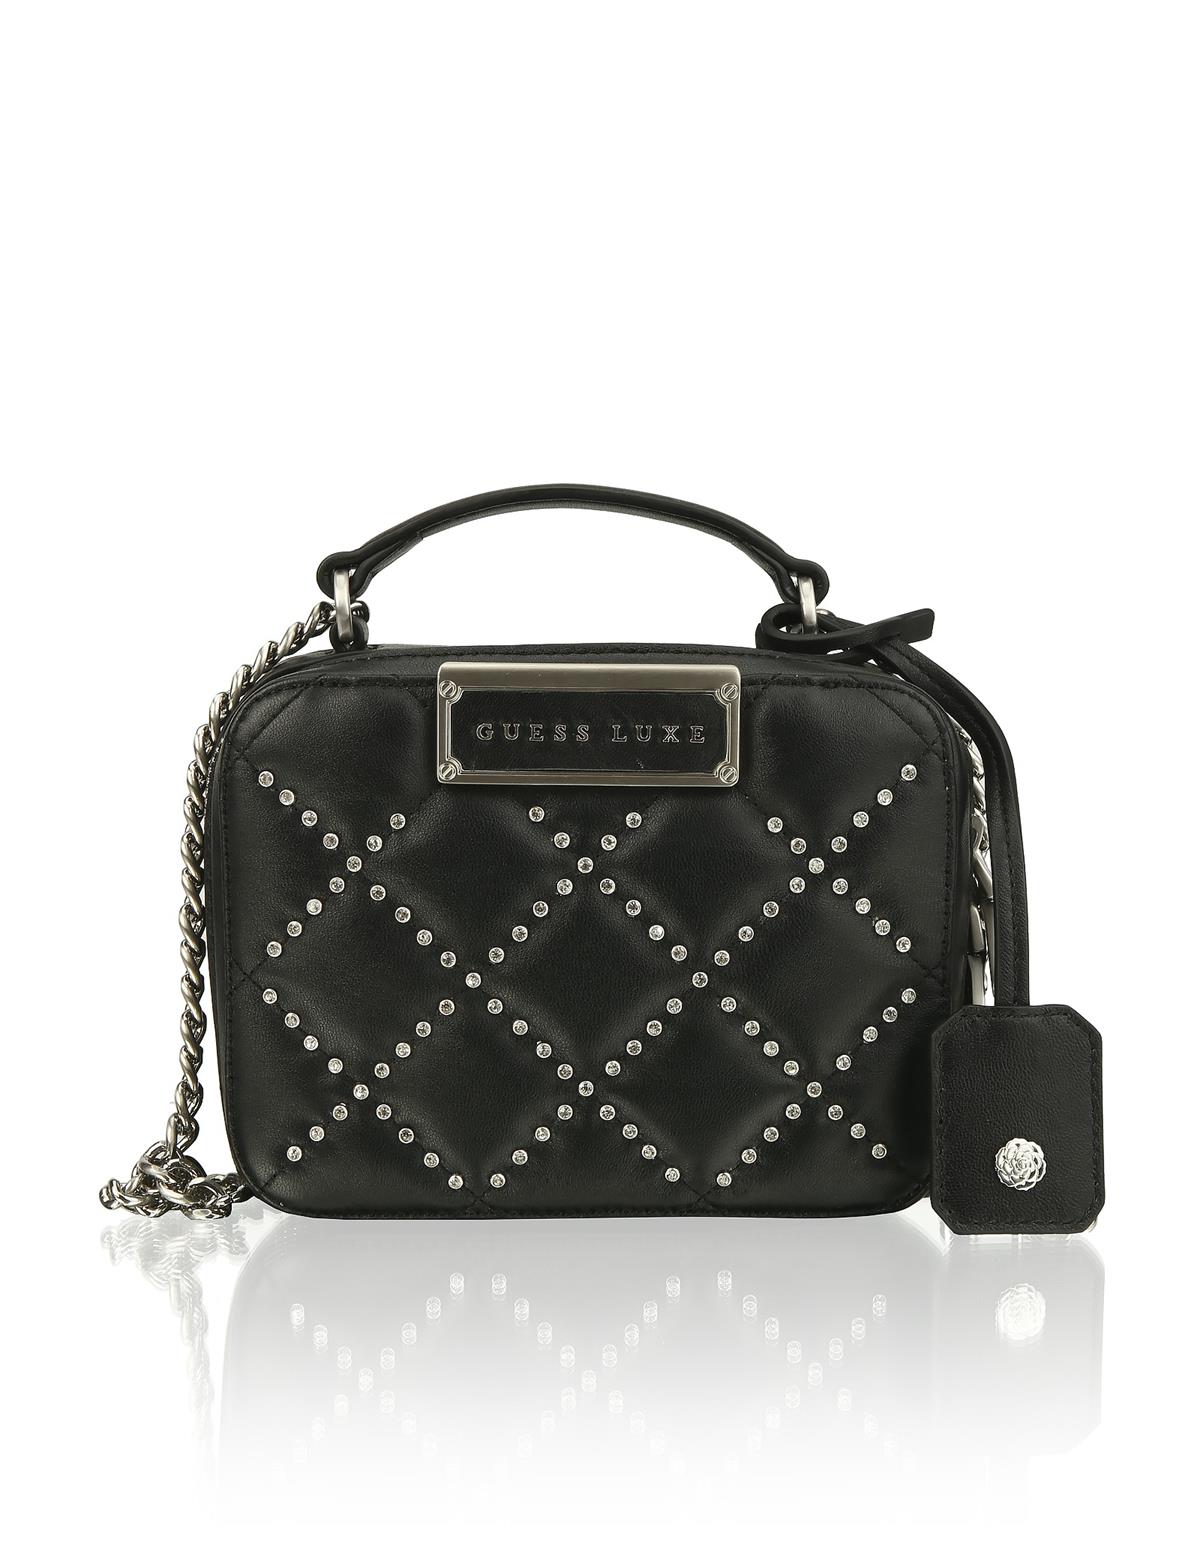 HUMANIC 44 Guess Quilted Bag EUR 170 6131402080